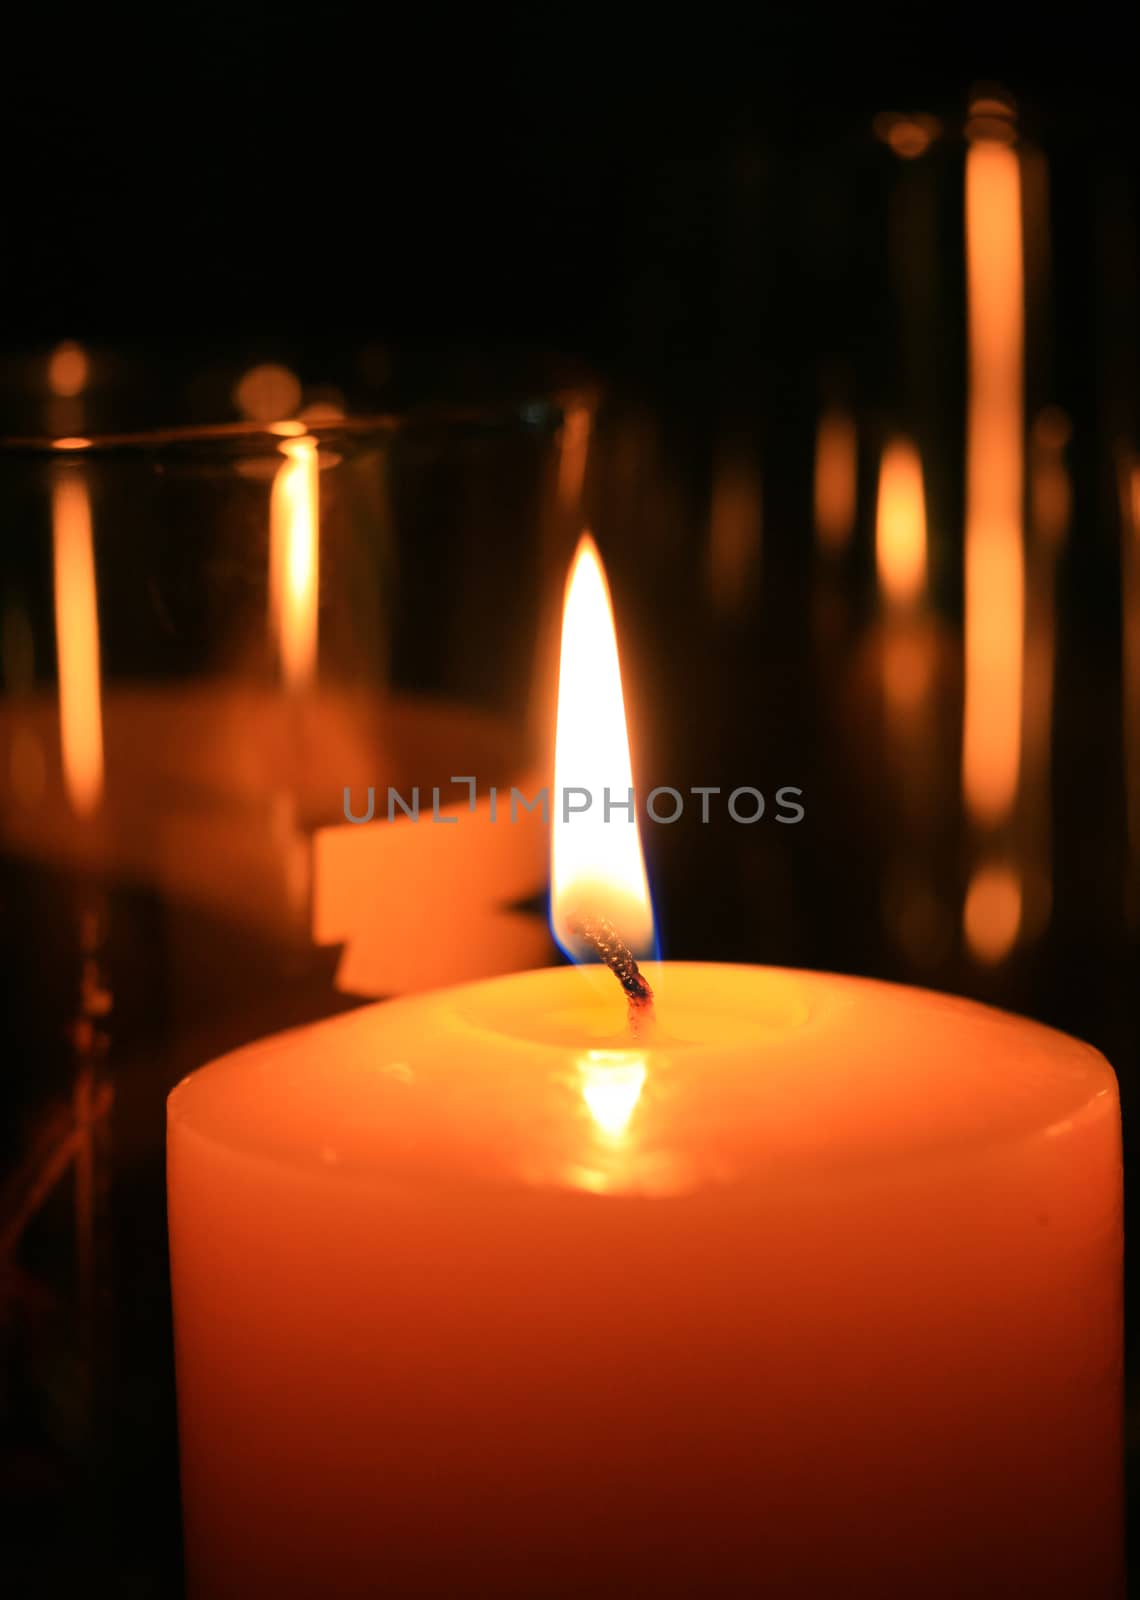 A One candle flame at night closeup